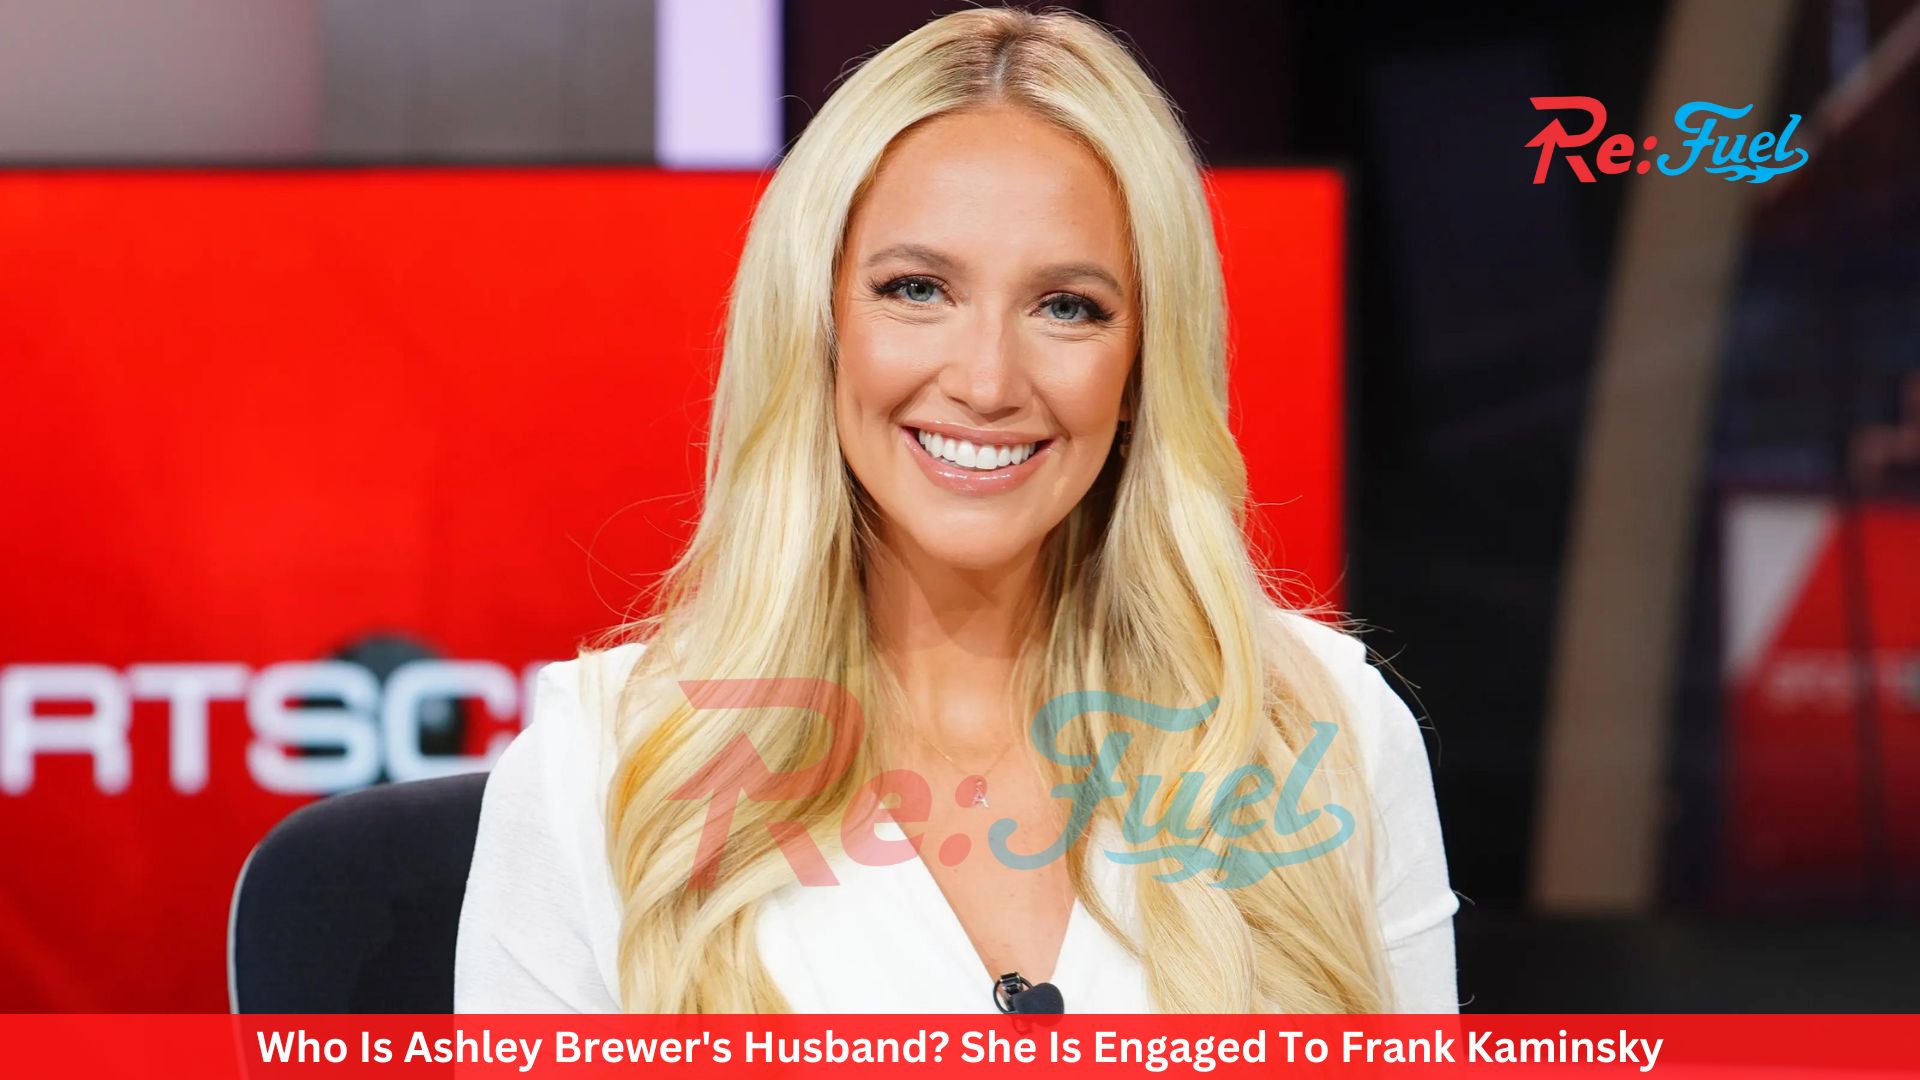 Who Is Ashley Brewer's Husband? She Is Engaged To Frank Kaminsky